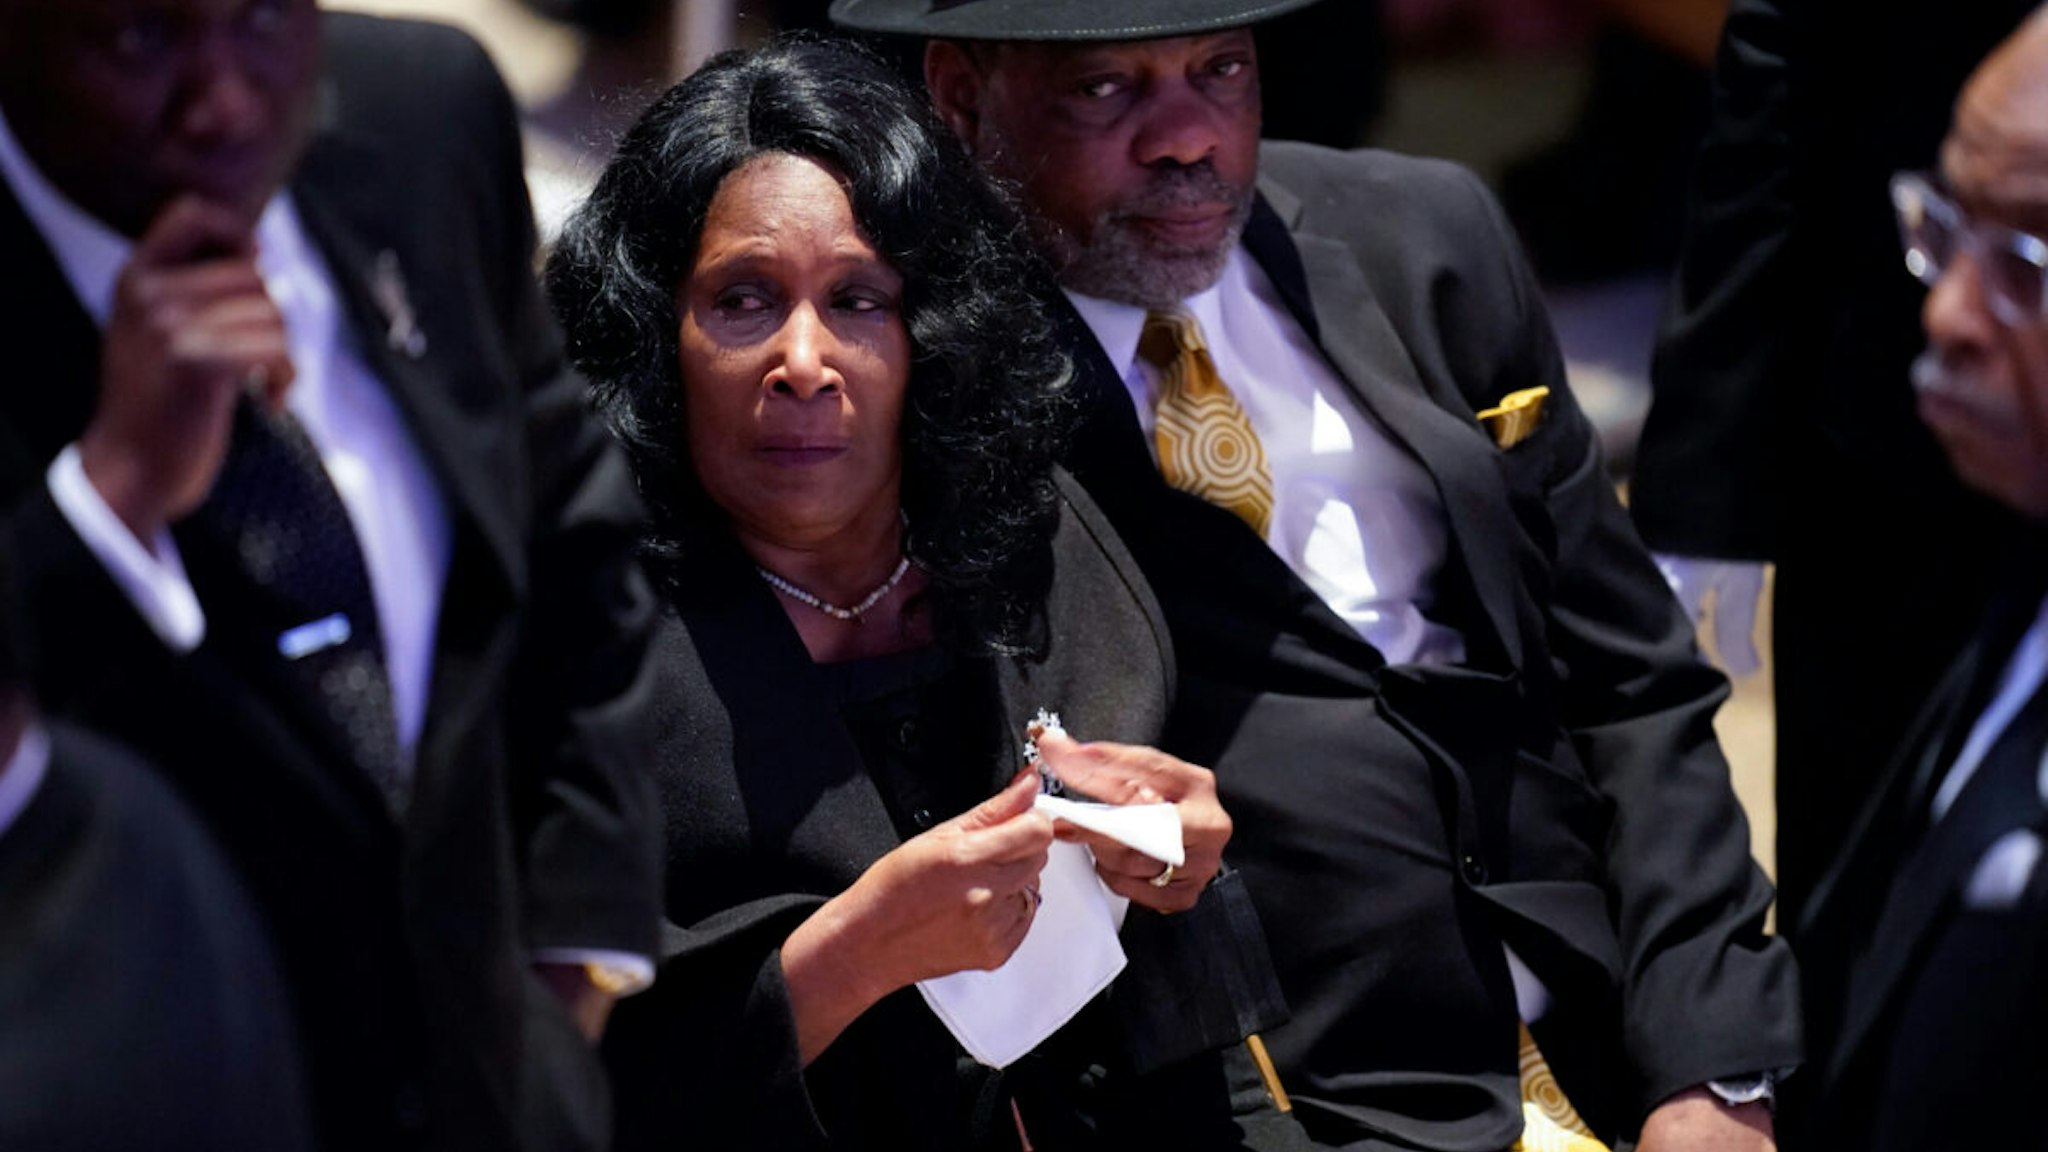 RowVaughn Wells and her husband Rodney Wells arrive for the funeral service for her son Tyre Nichols at Mississippi Boulevard Christian Church on February 1, 2023 in Memphis, Tennessee.